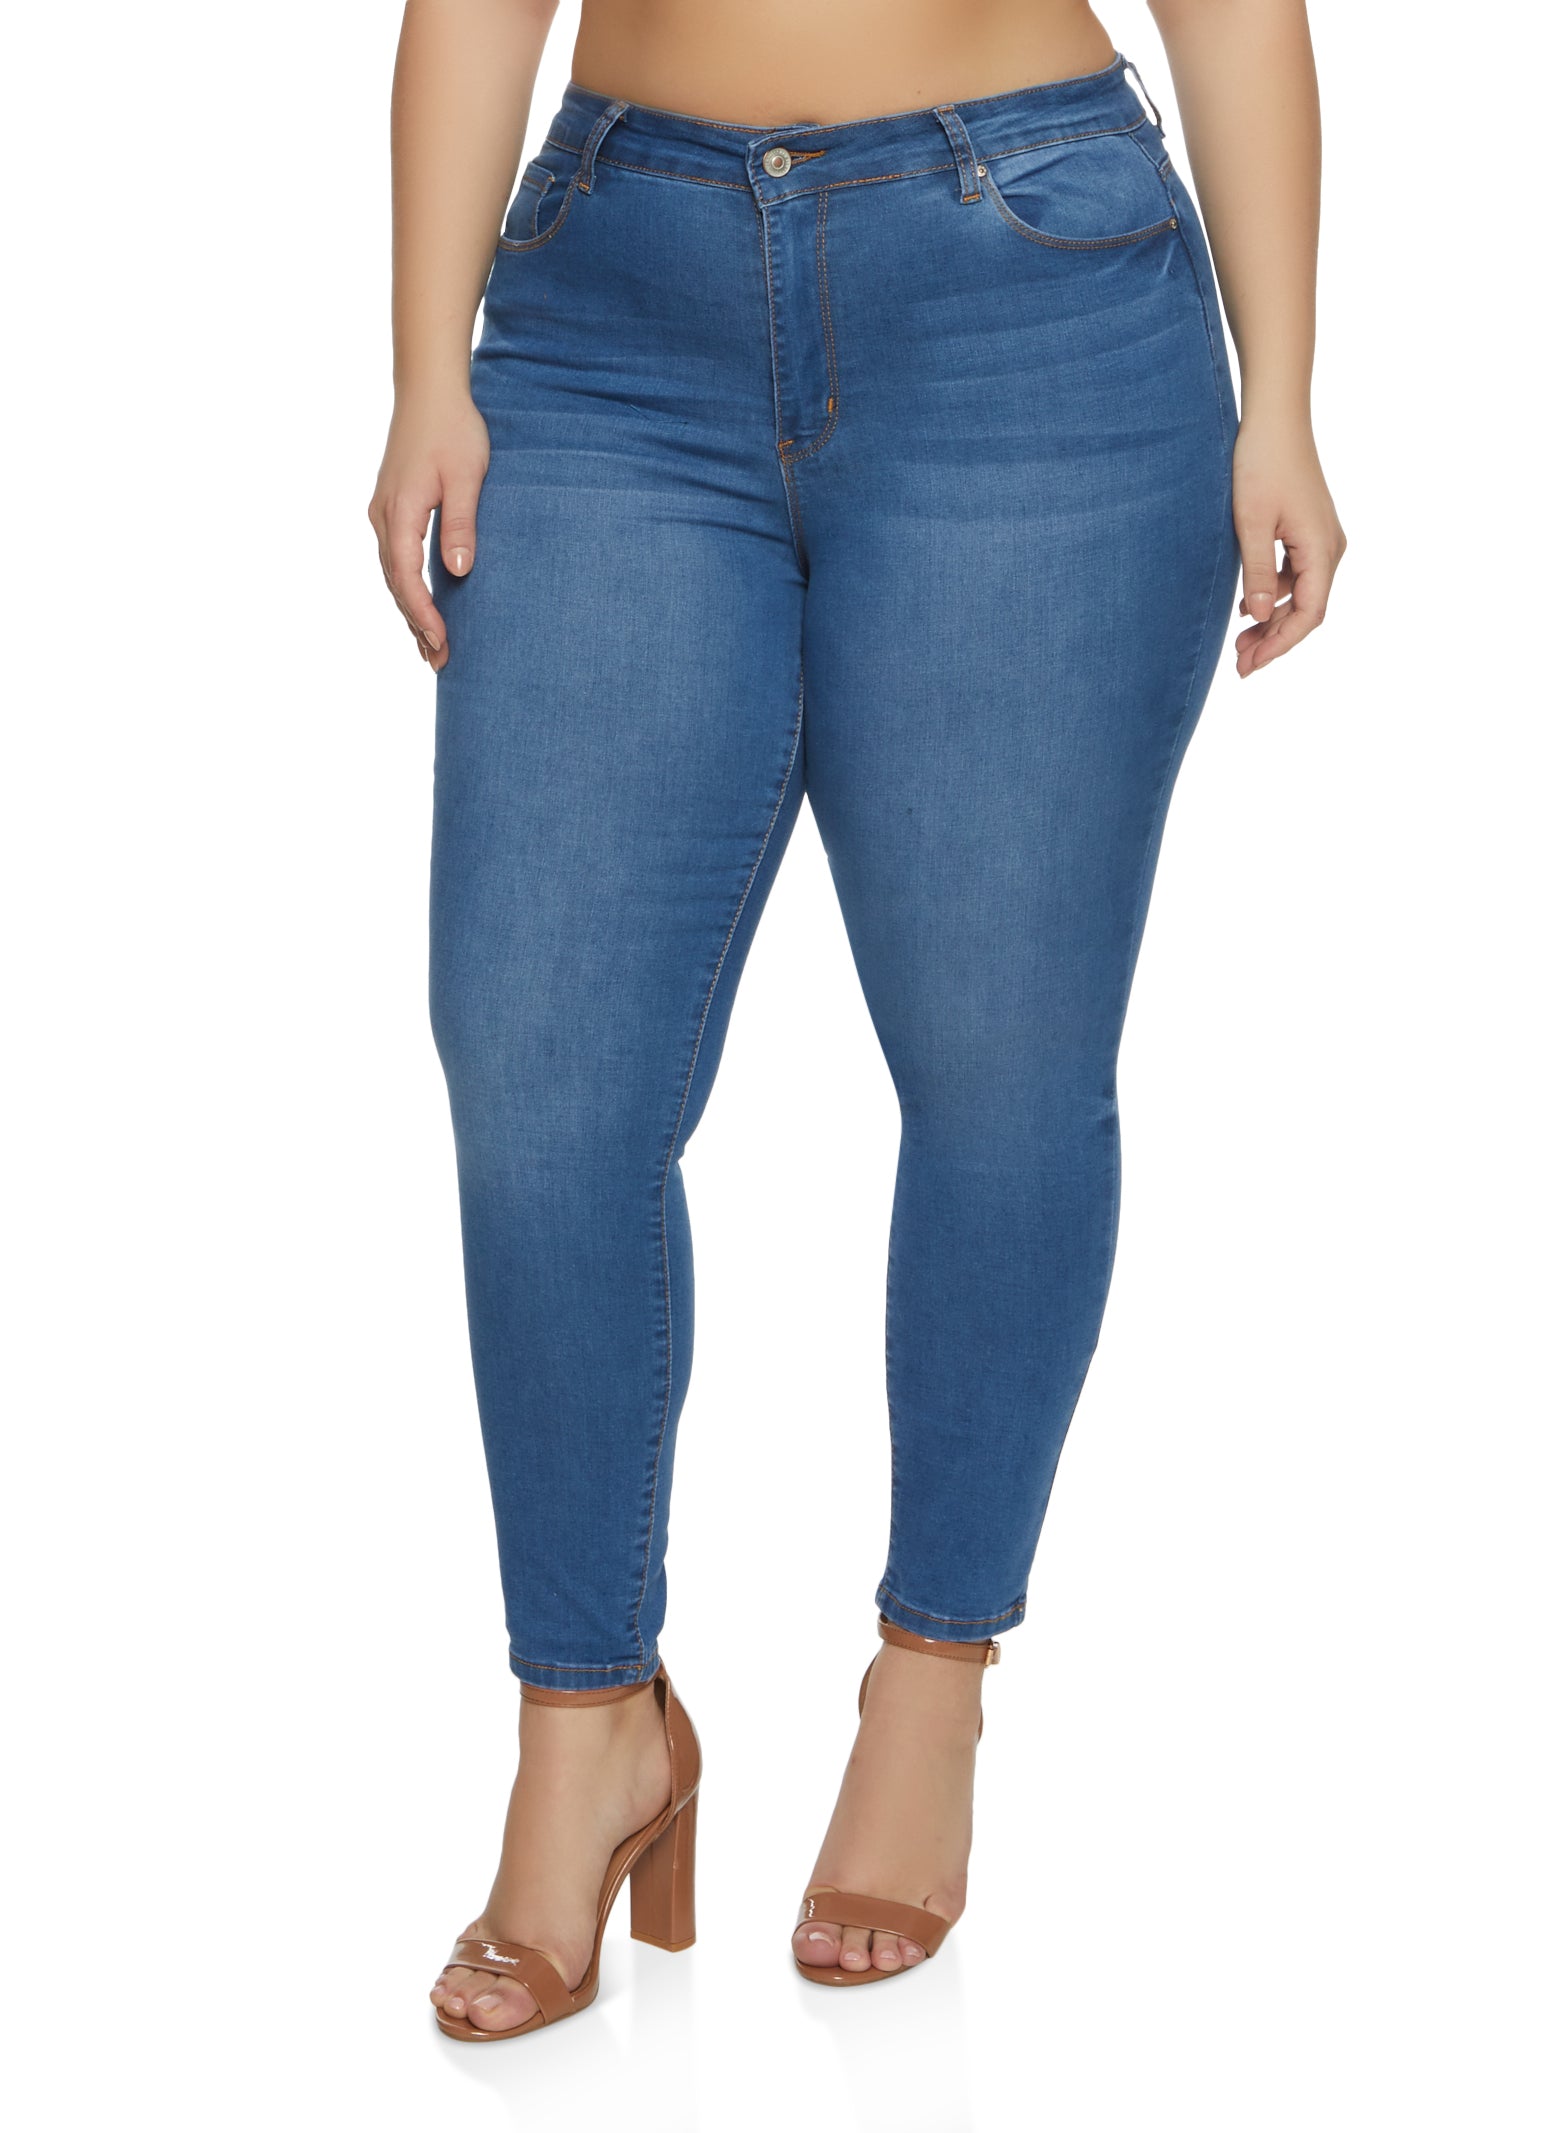 Plus Size WAX High Waist Whiskered Jeans